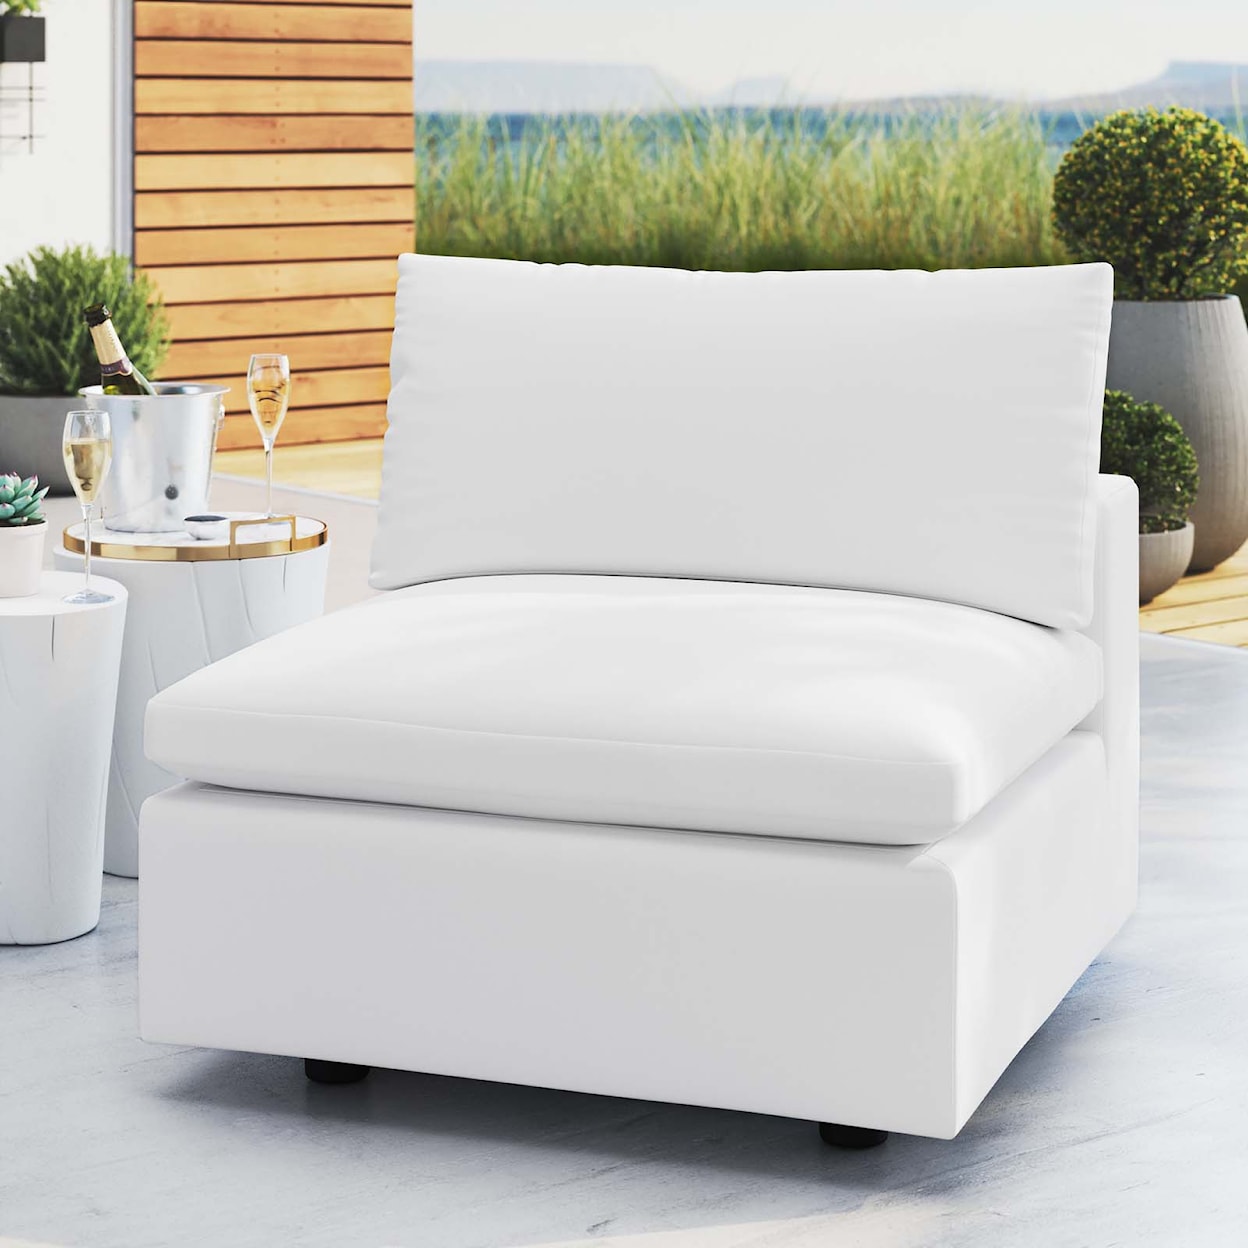 Modway Commix Outdoor Armless Chair